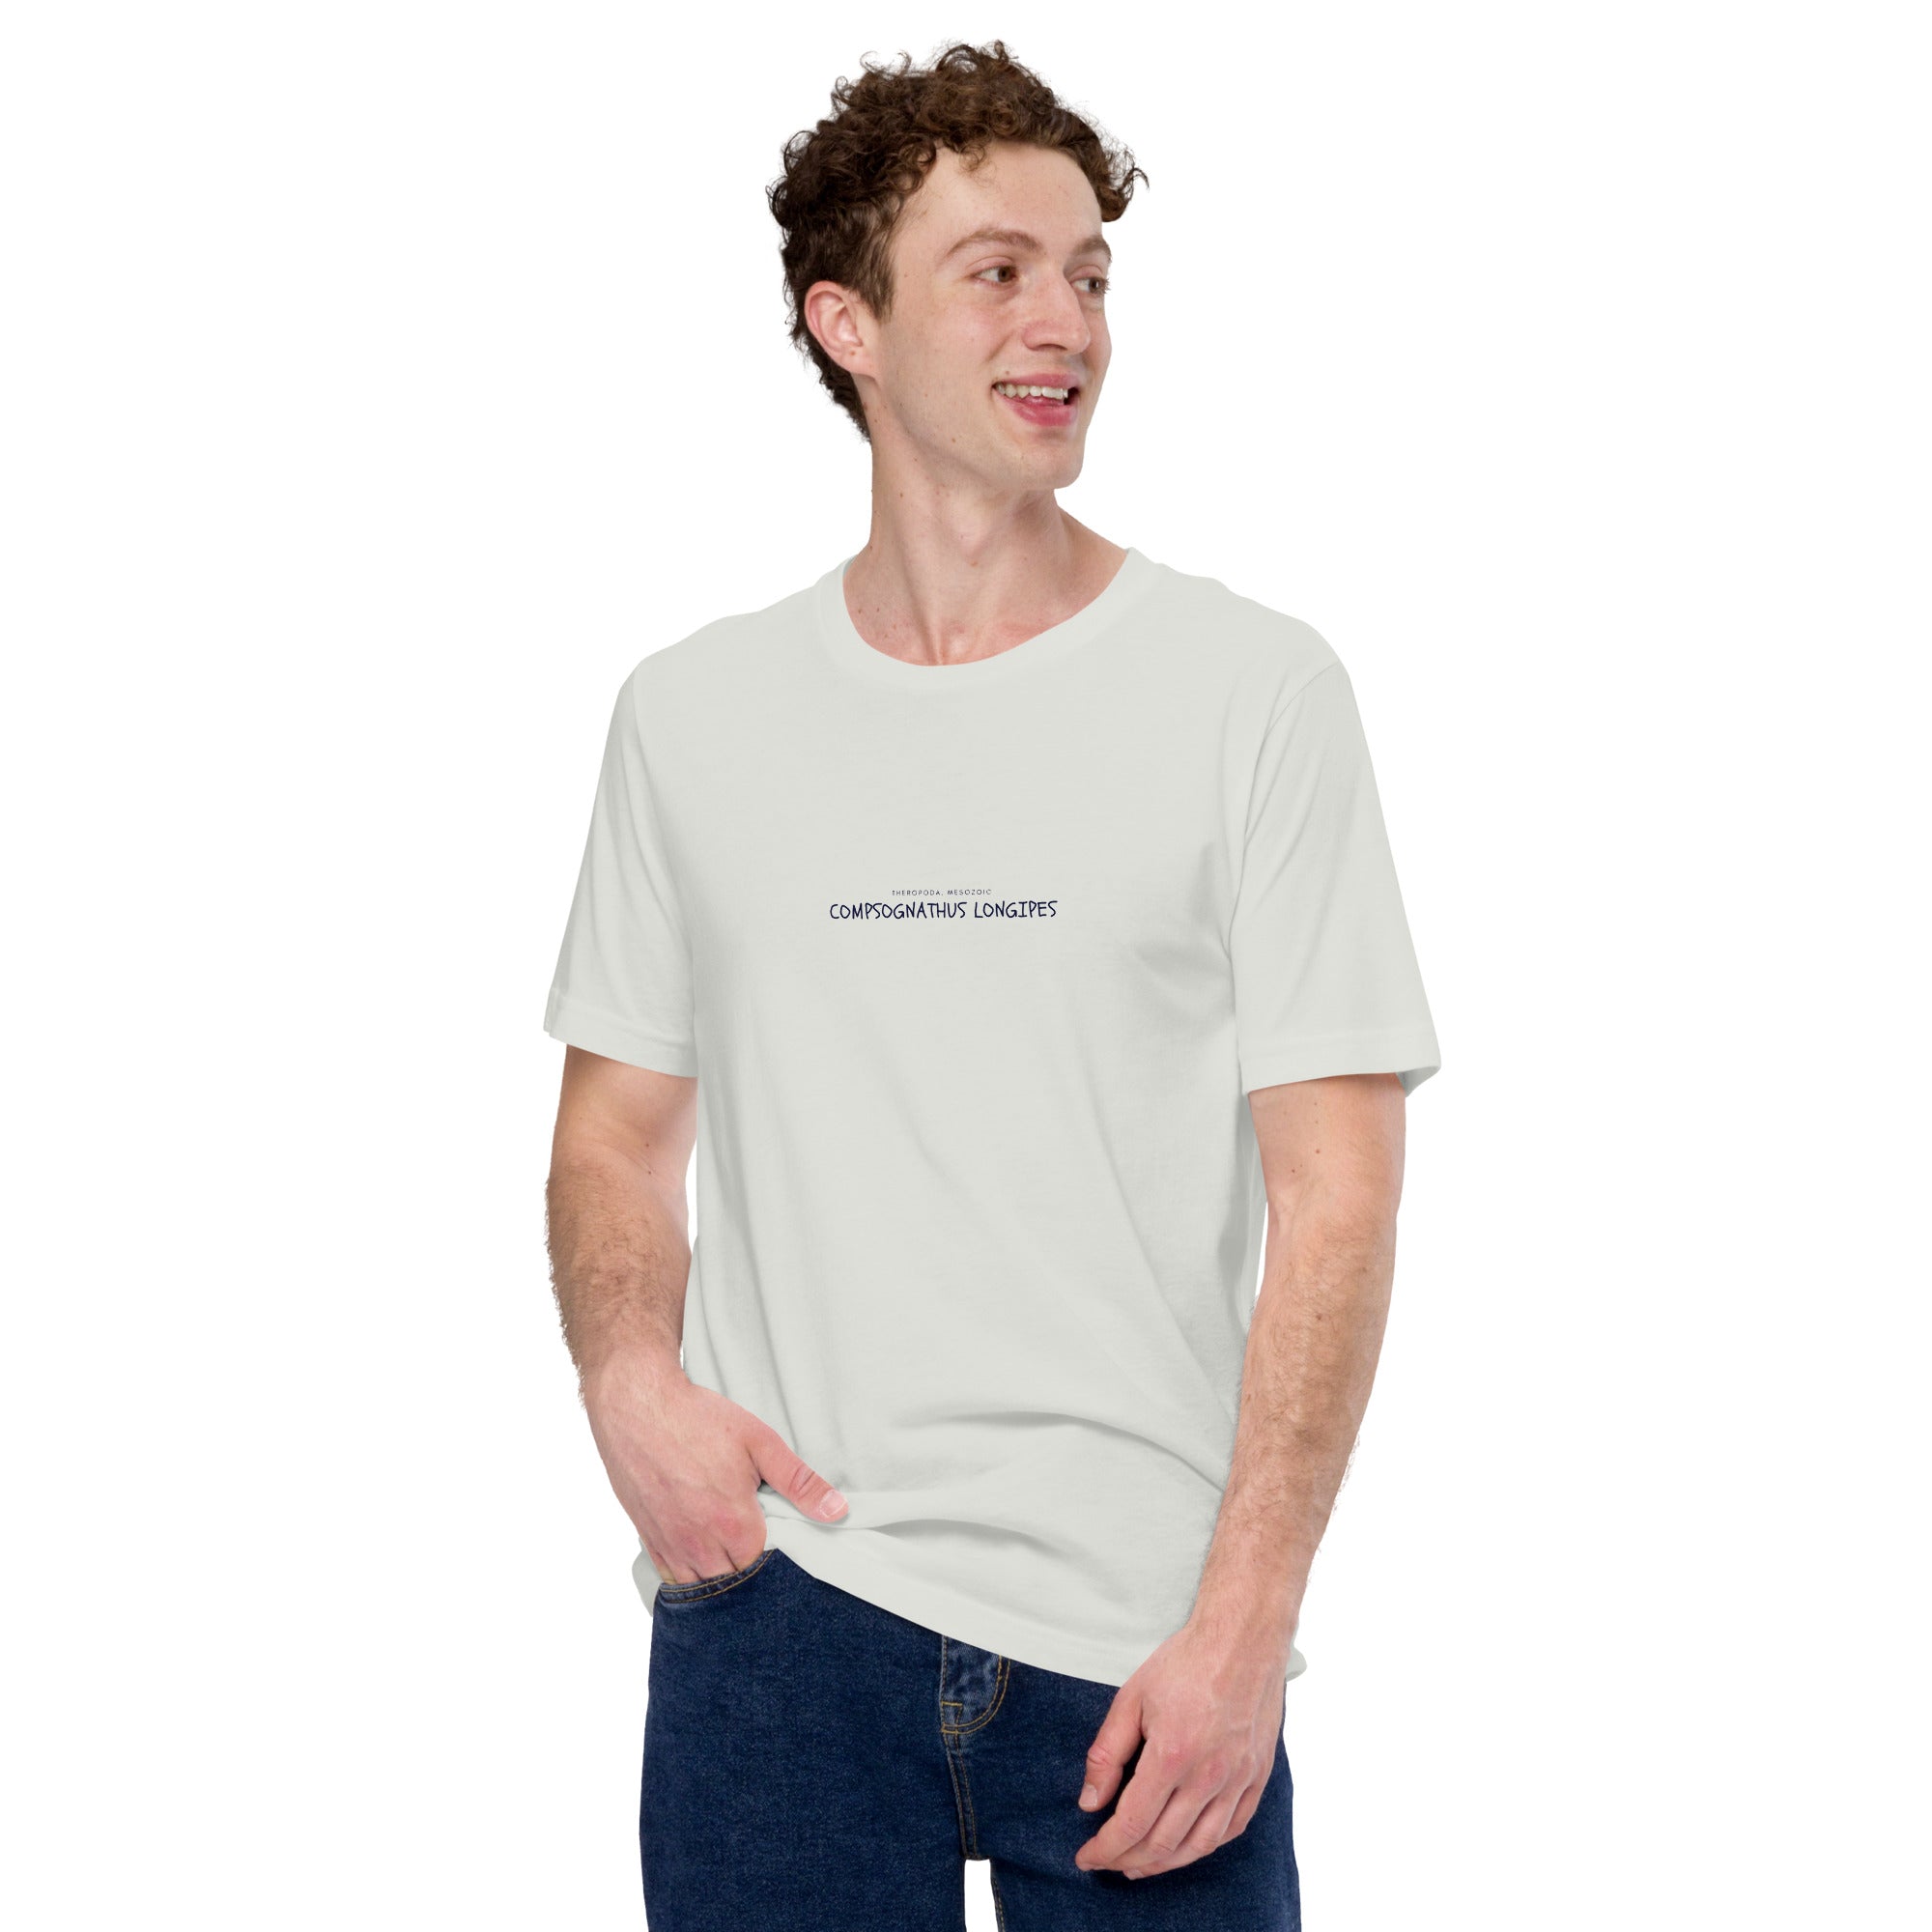 Unisex t-shirt with "Compsognathus longipes" text